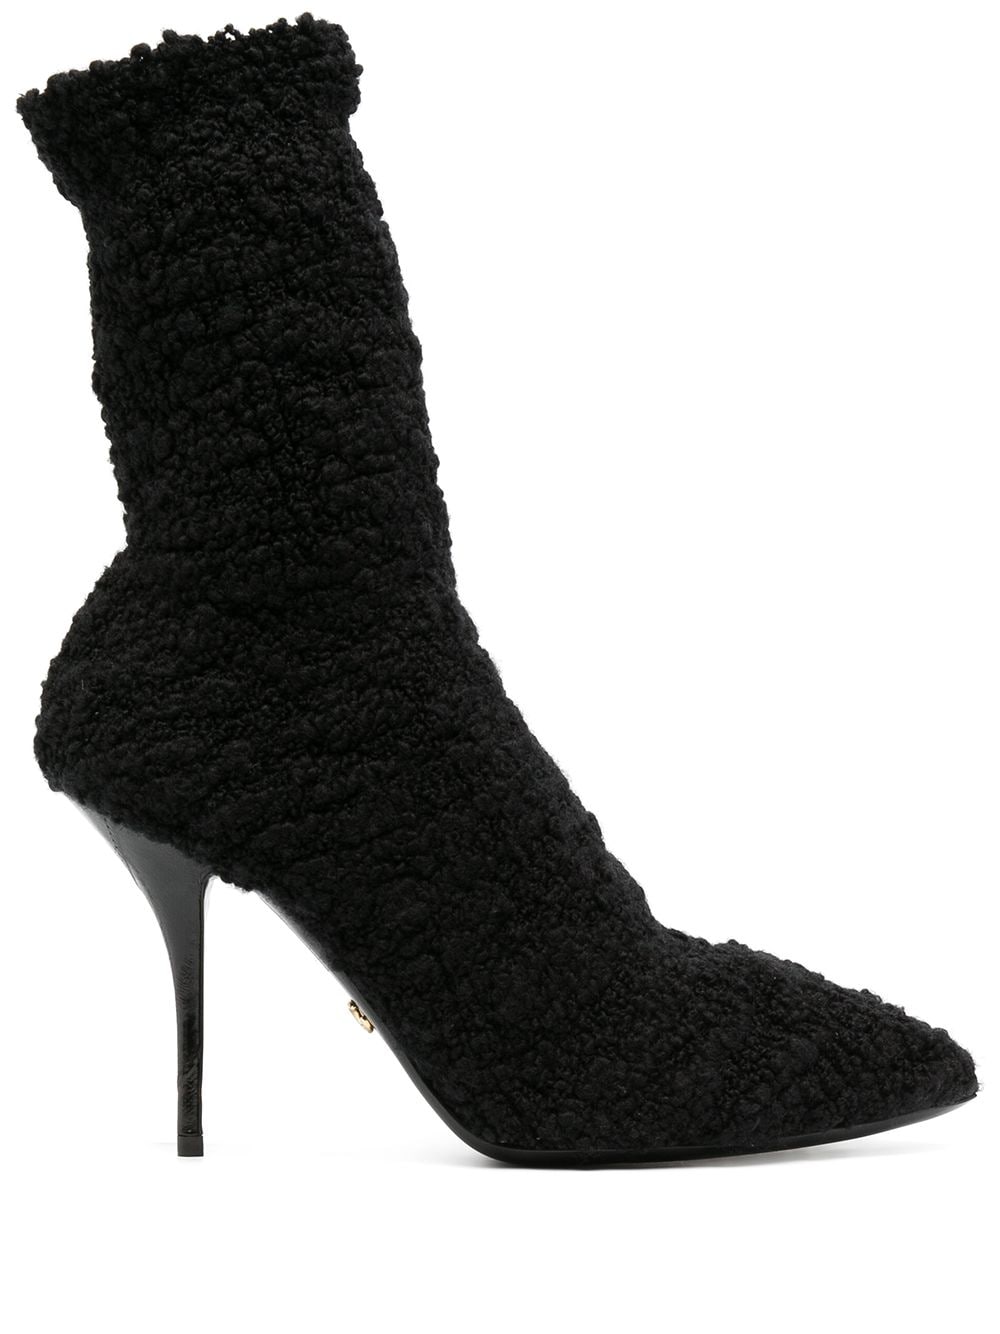 Image 1 of Dolce & Gabbana shearling stiletto heel boots